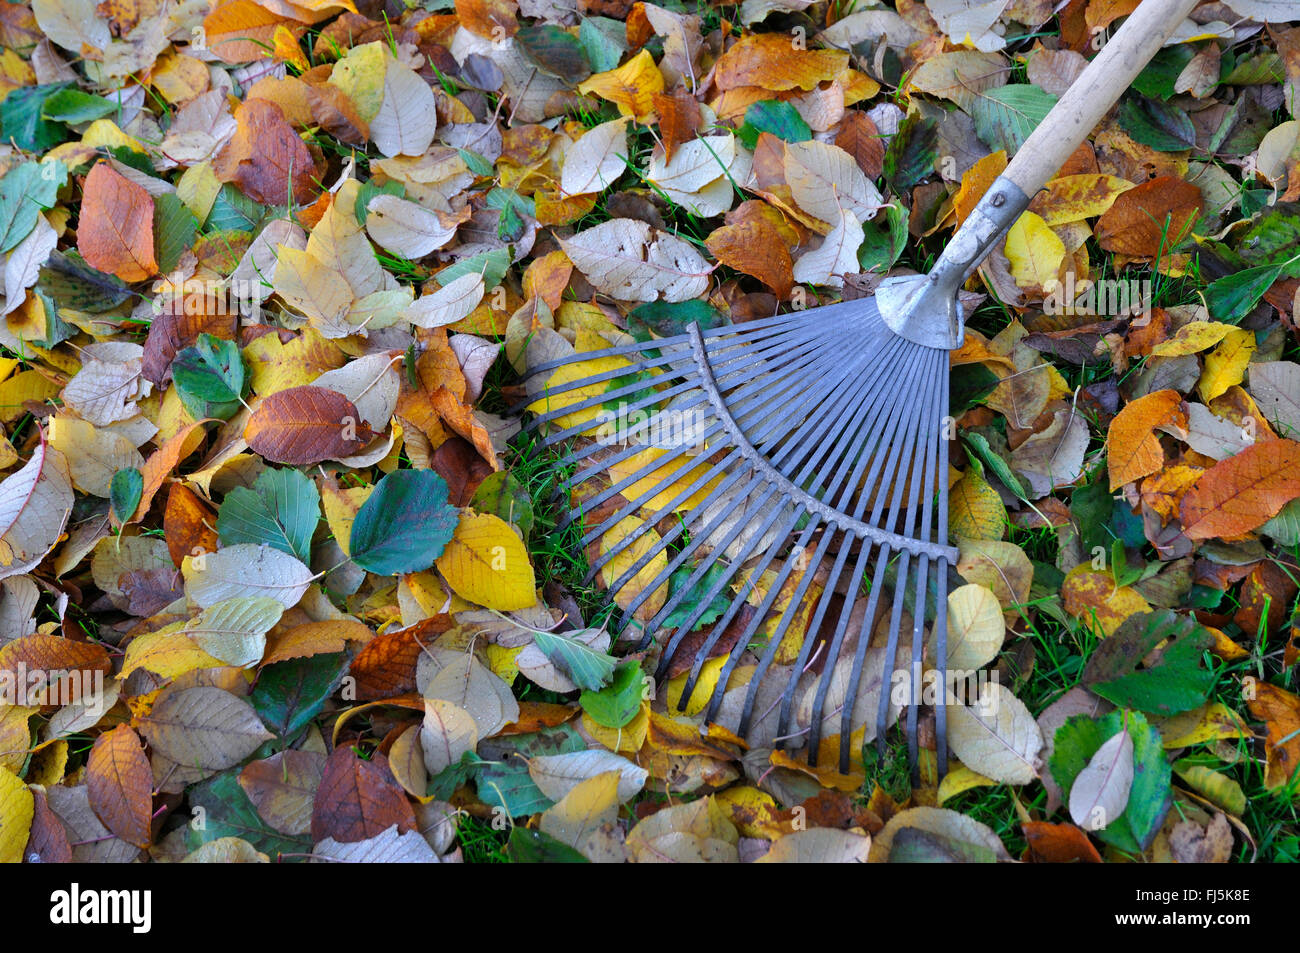 leaf rake for sweeping the foliage, Germany, North Rhine-Westphalia, Ruhr Area, Castrop-Rauxel Stock Photo